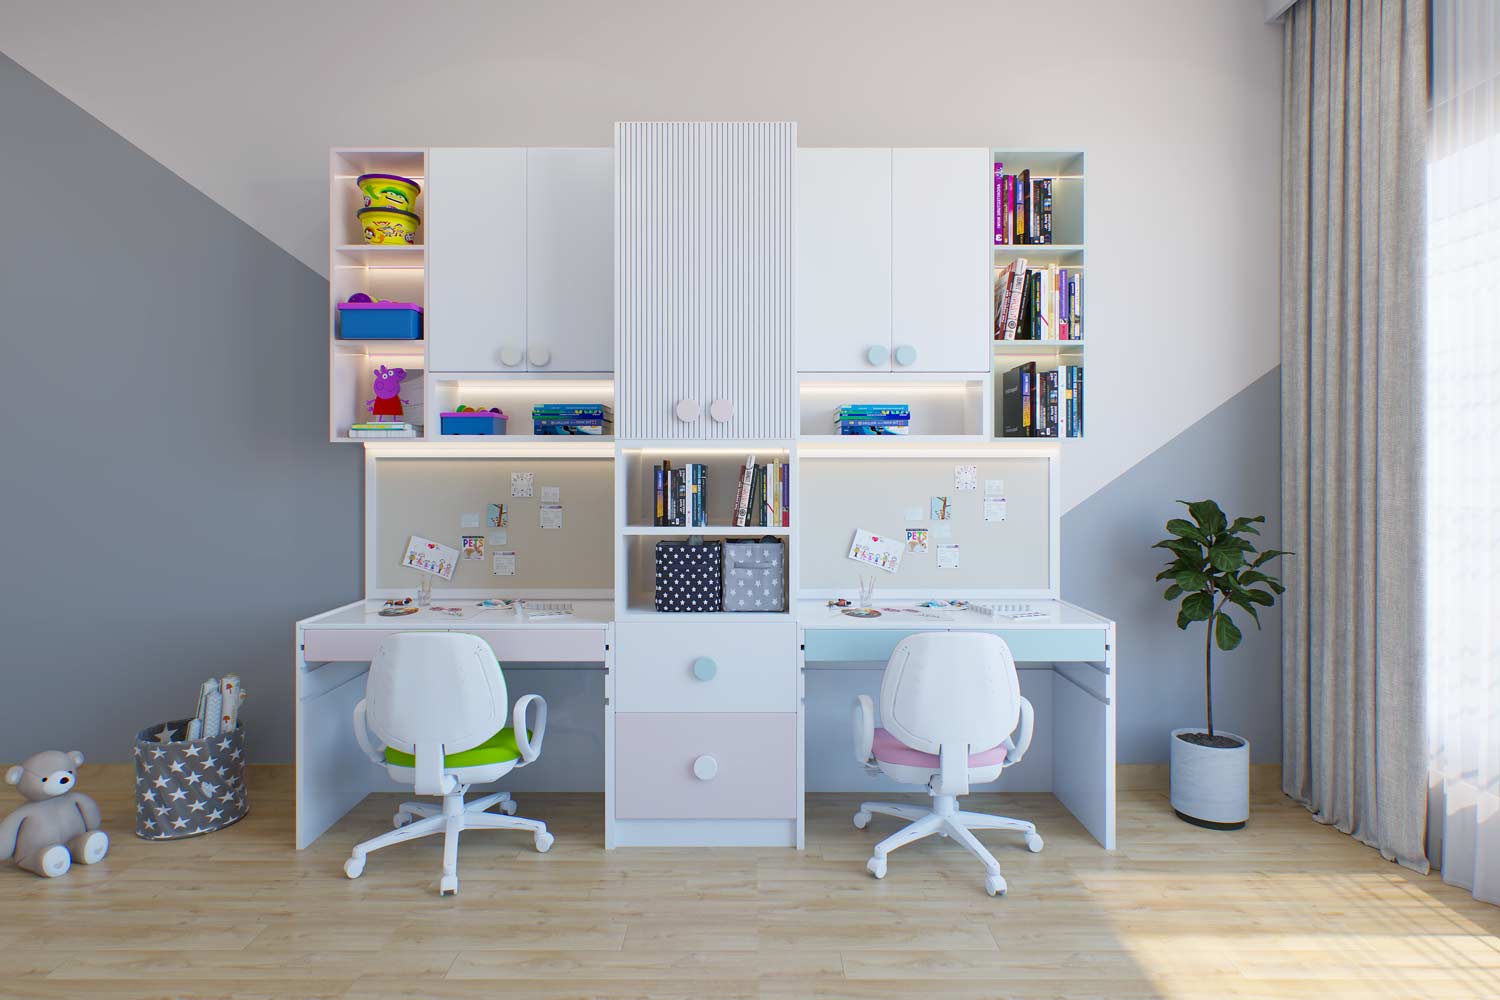 Spacious children's study room with a bright window, two white and green desks with shelves, a plush toy, and a potted plant for a serene learning environment.